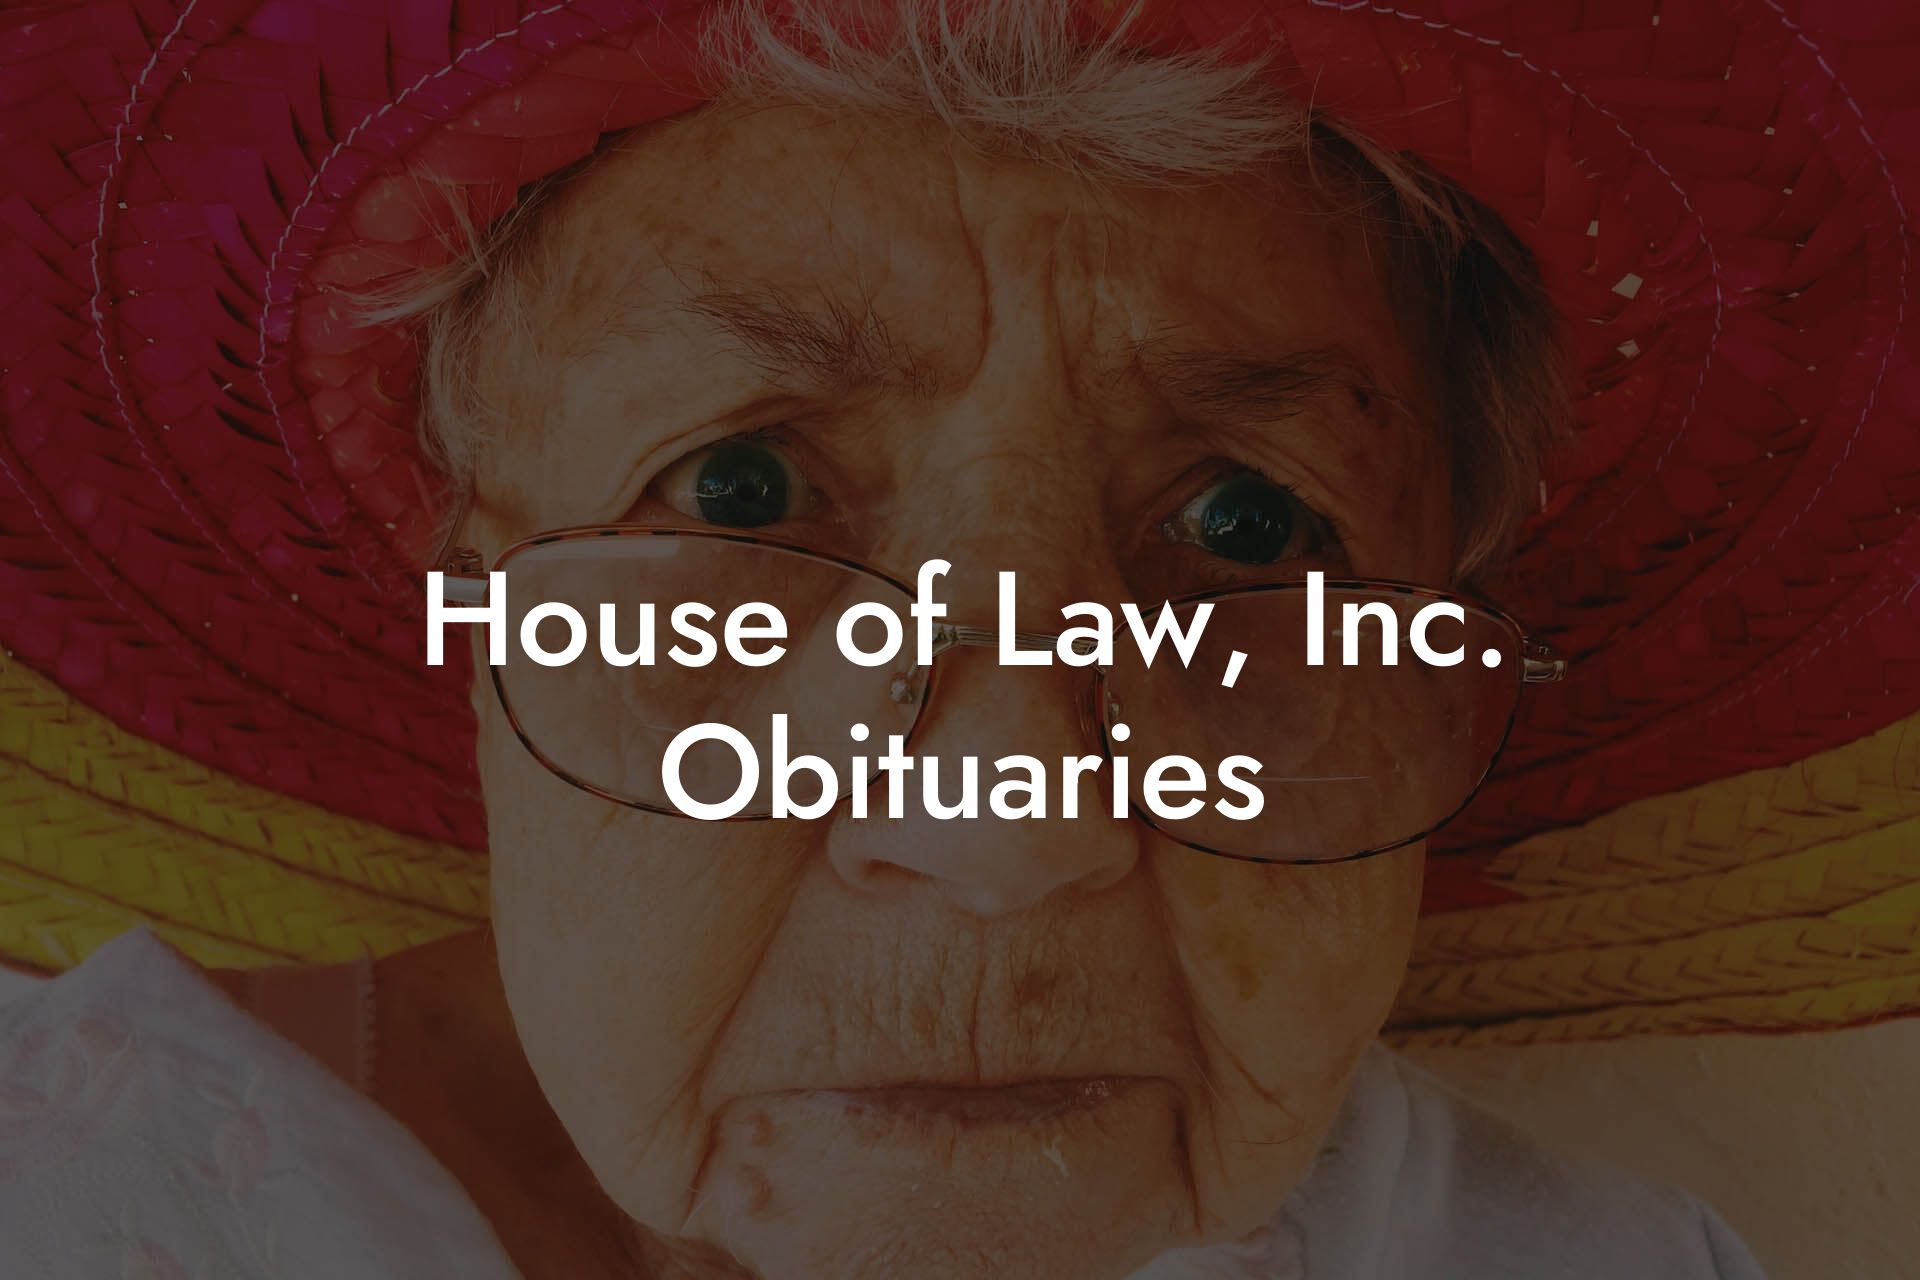 House of Law, Inc. Obituaries